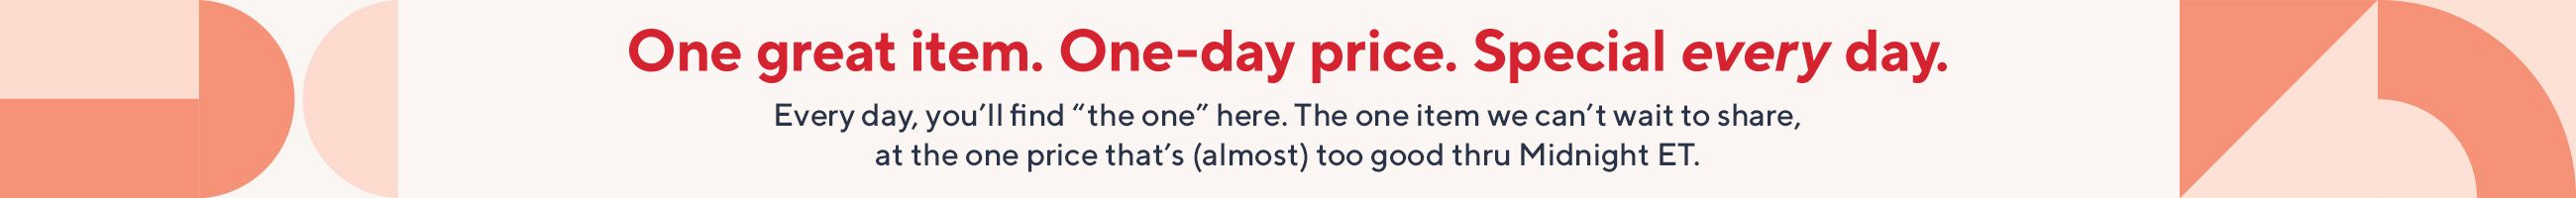 One great item. One-day price. Special every day. Every day, you’ll find “the one” here. The one item we can’t wait to share, at the one price that’s (almost) too good thru Midnight ET.